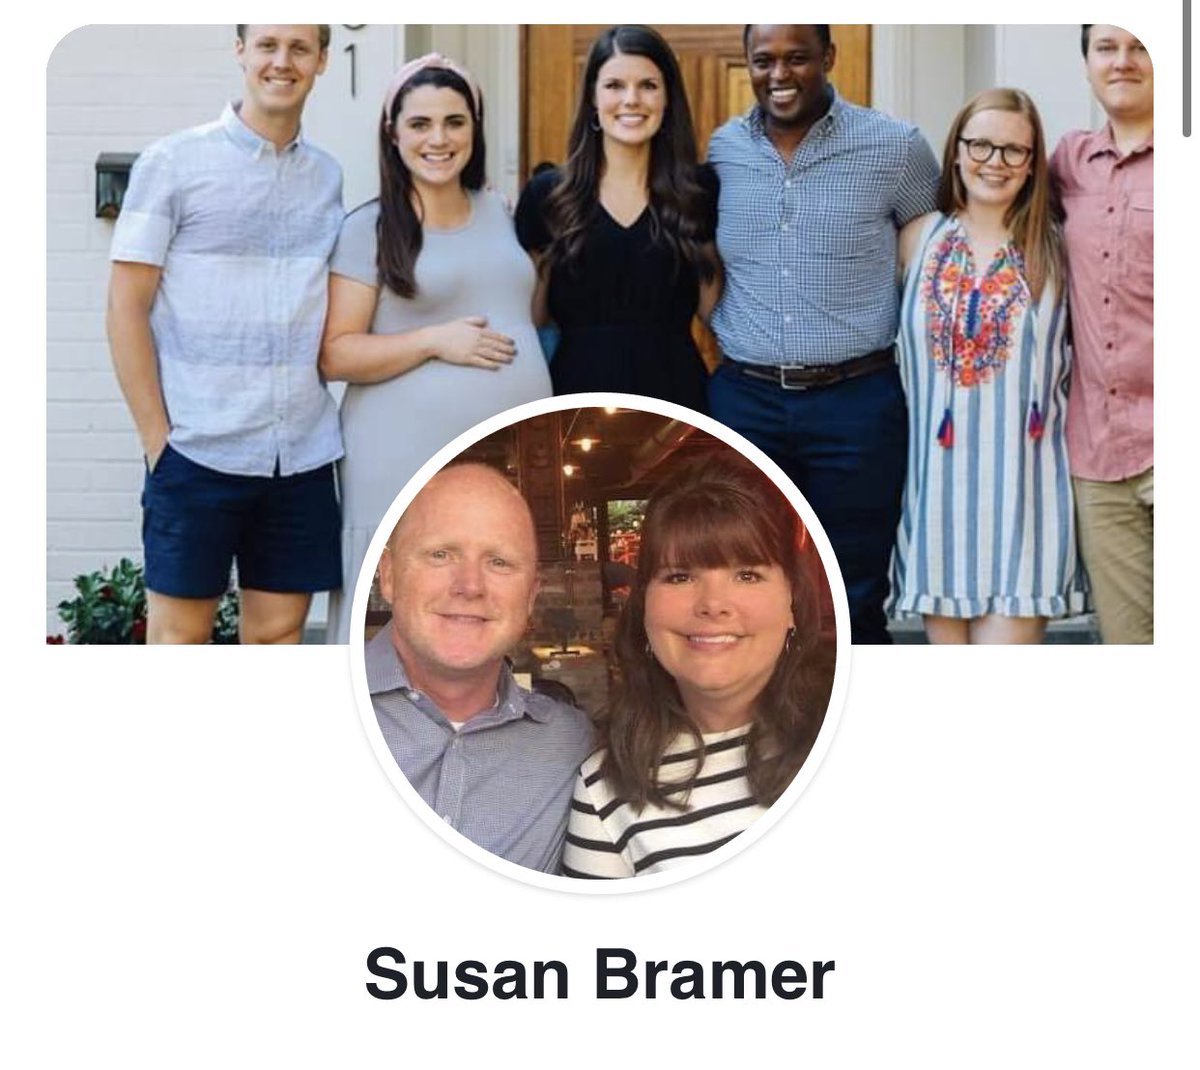 Makenze Evans’ parents appear to be Susan and Darrell Bramer. Susan has a picture of Makenze and Daniel on her Facebook.Mitch McConnell has three daughters: Porter, Claire, and Eleanor. That rumor about Makenze being Mitch’s granddaughter doesn’t appear to be true.